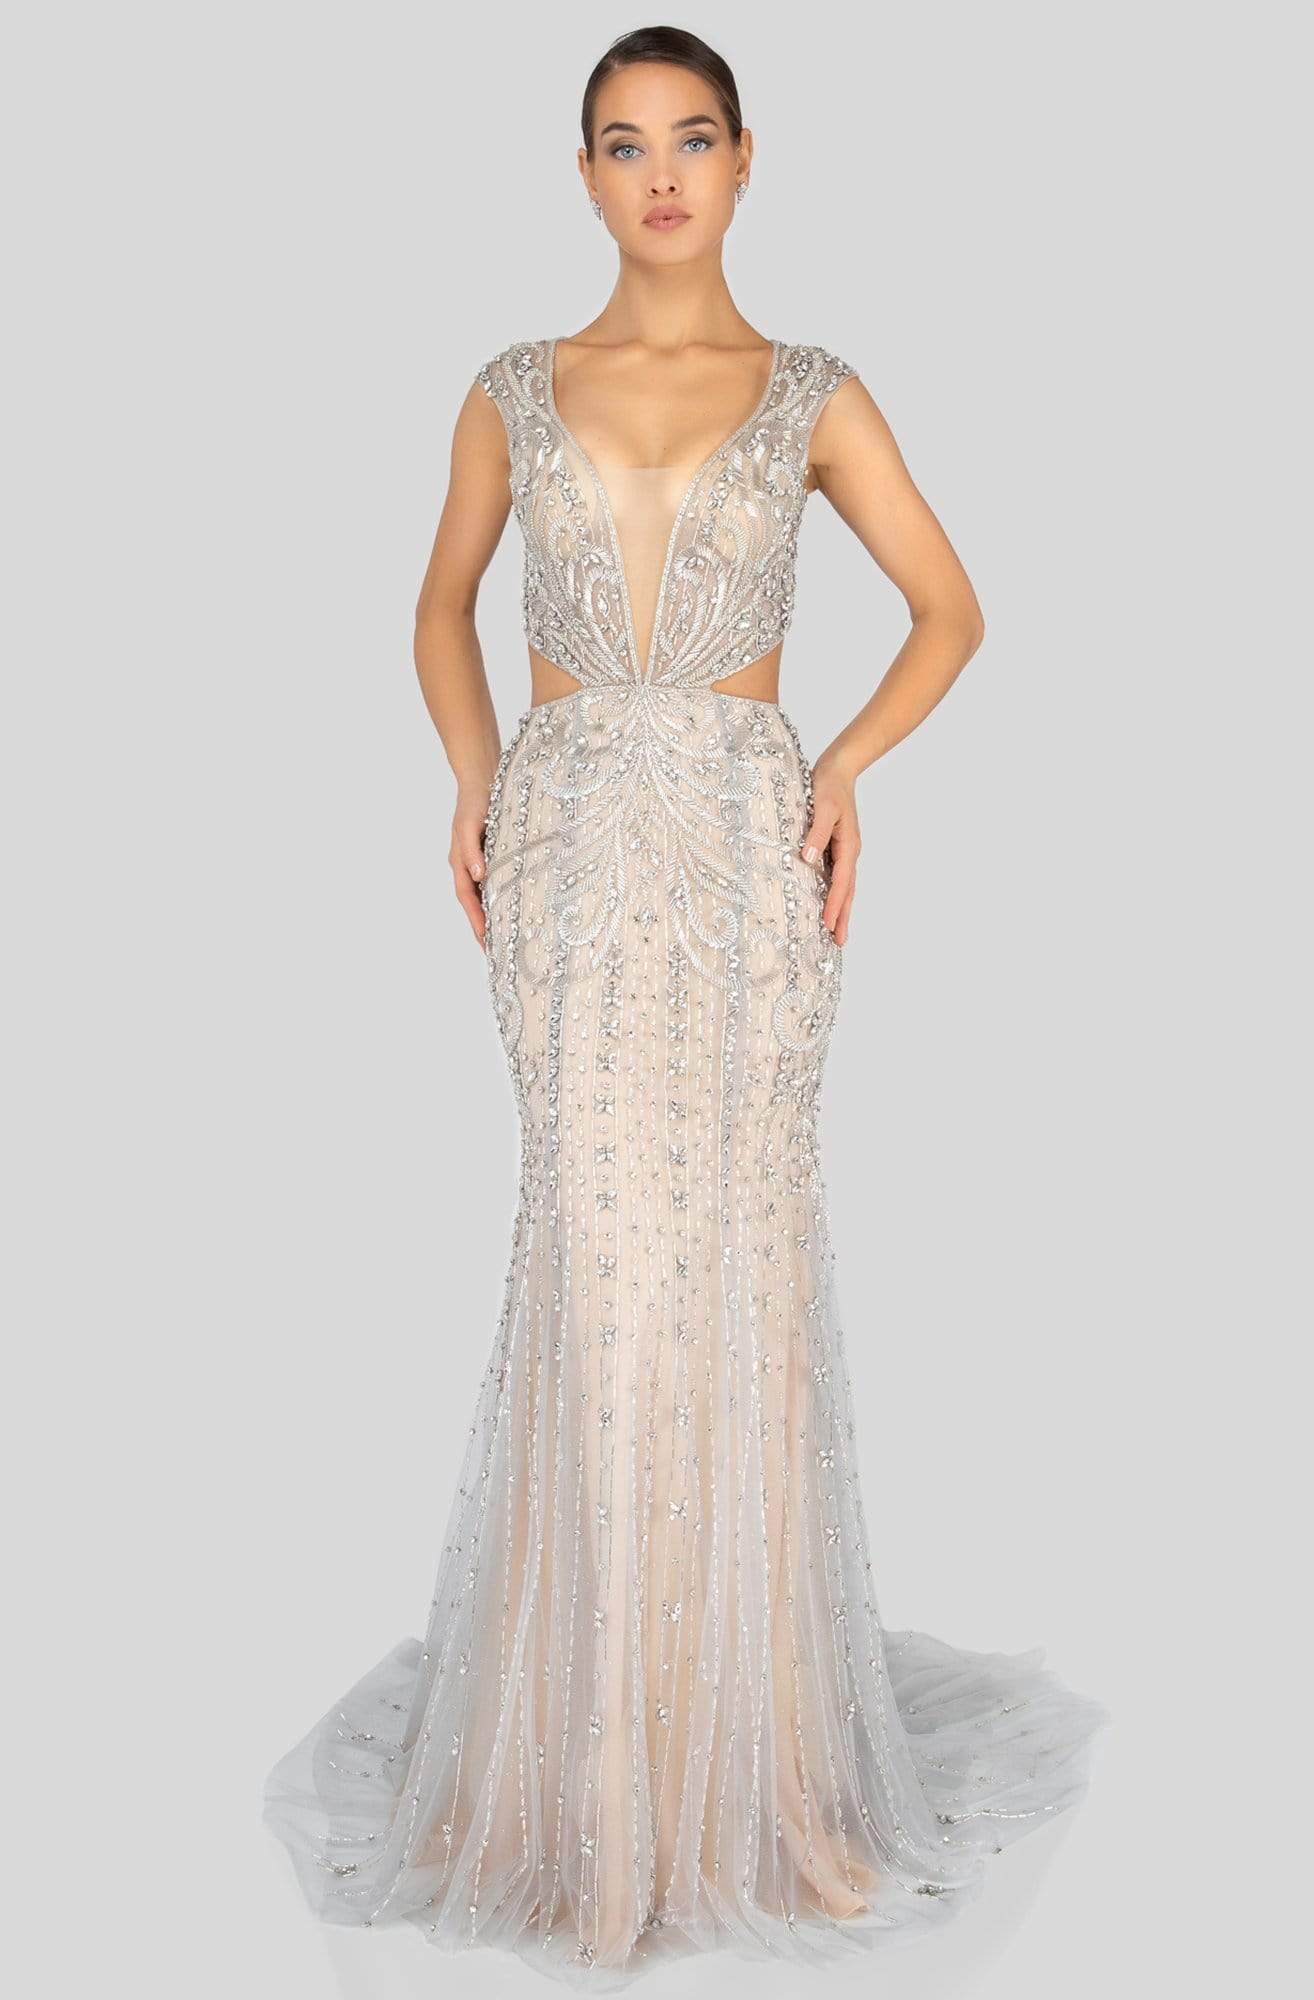 Image of Terani Couture - 1911GL9500 Bead Embellished Cutouts Sheath Gown